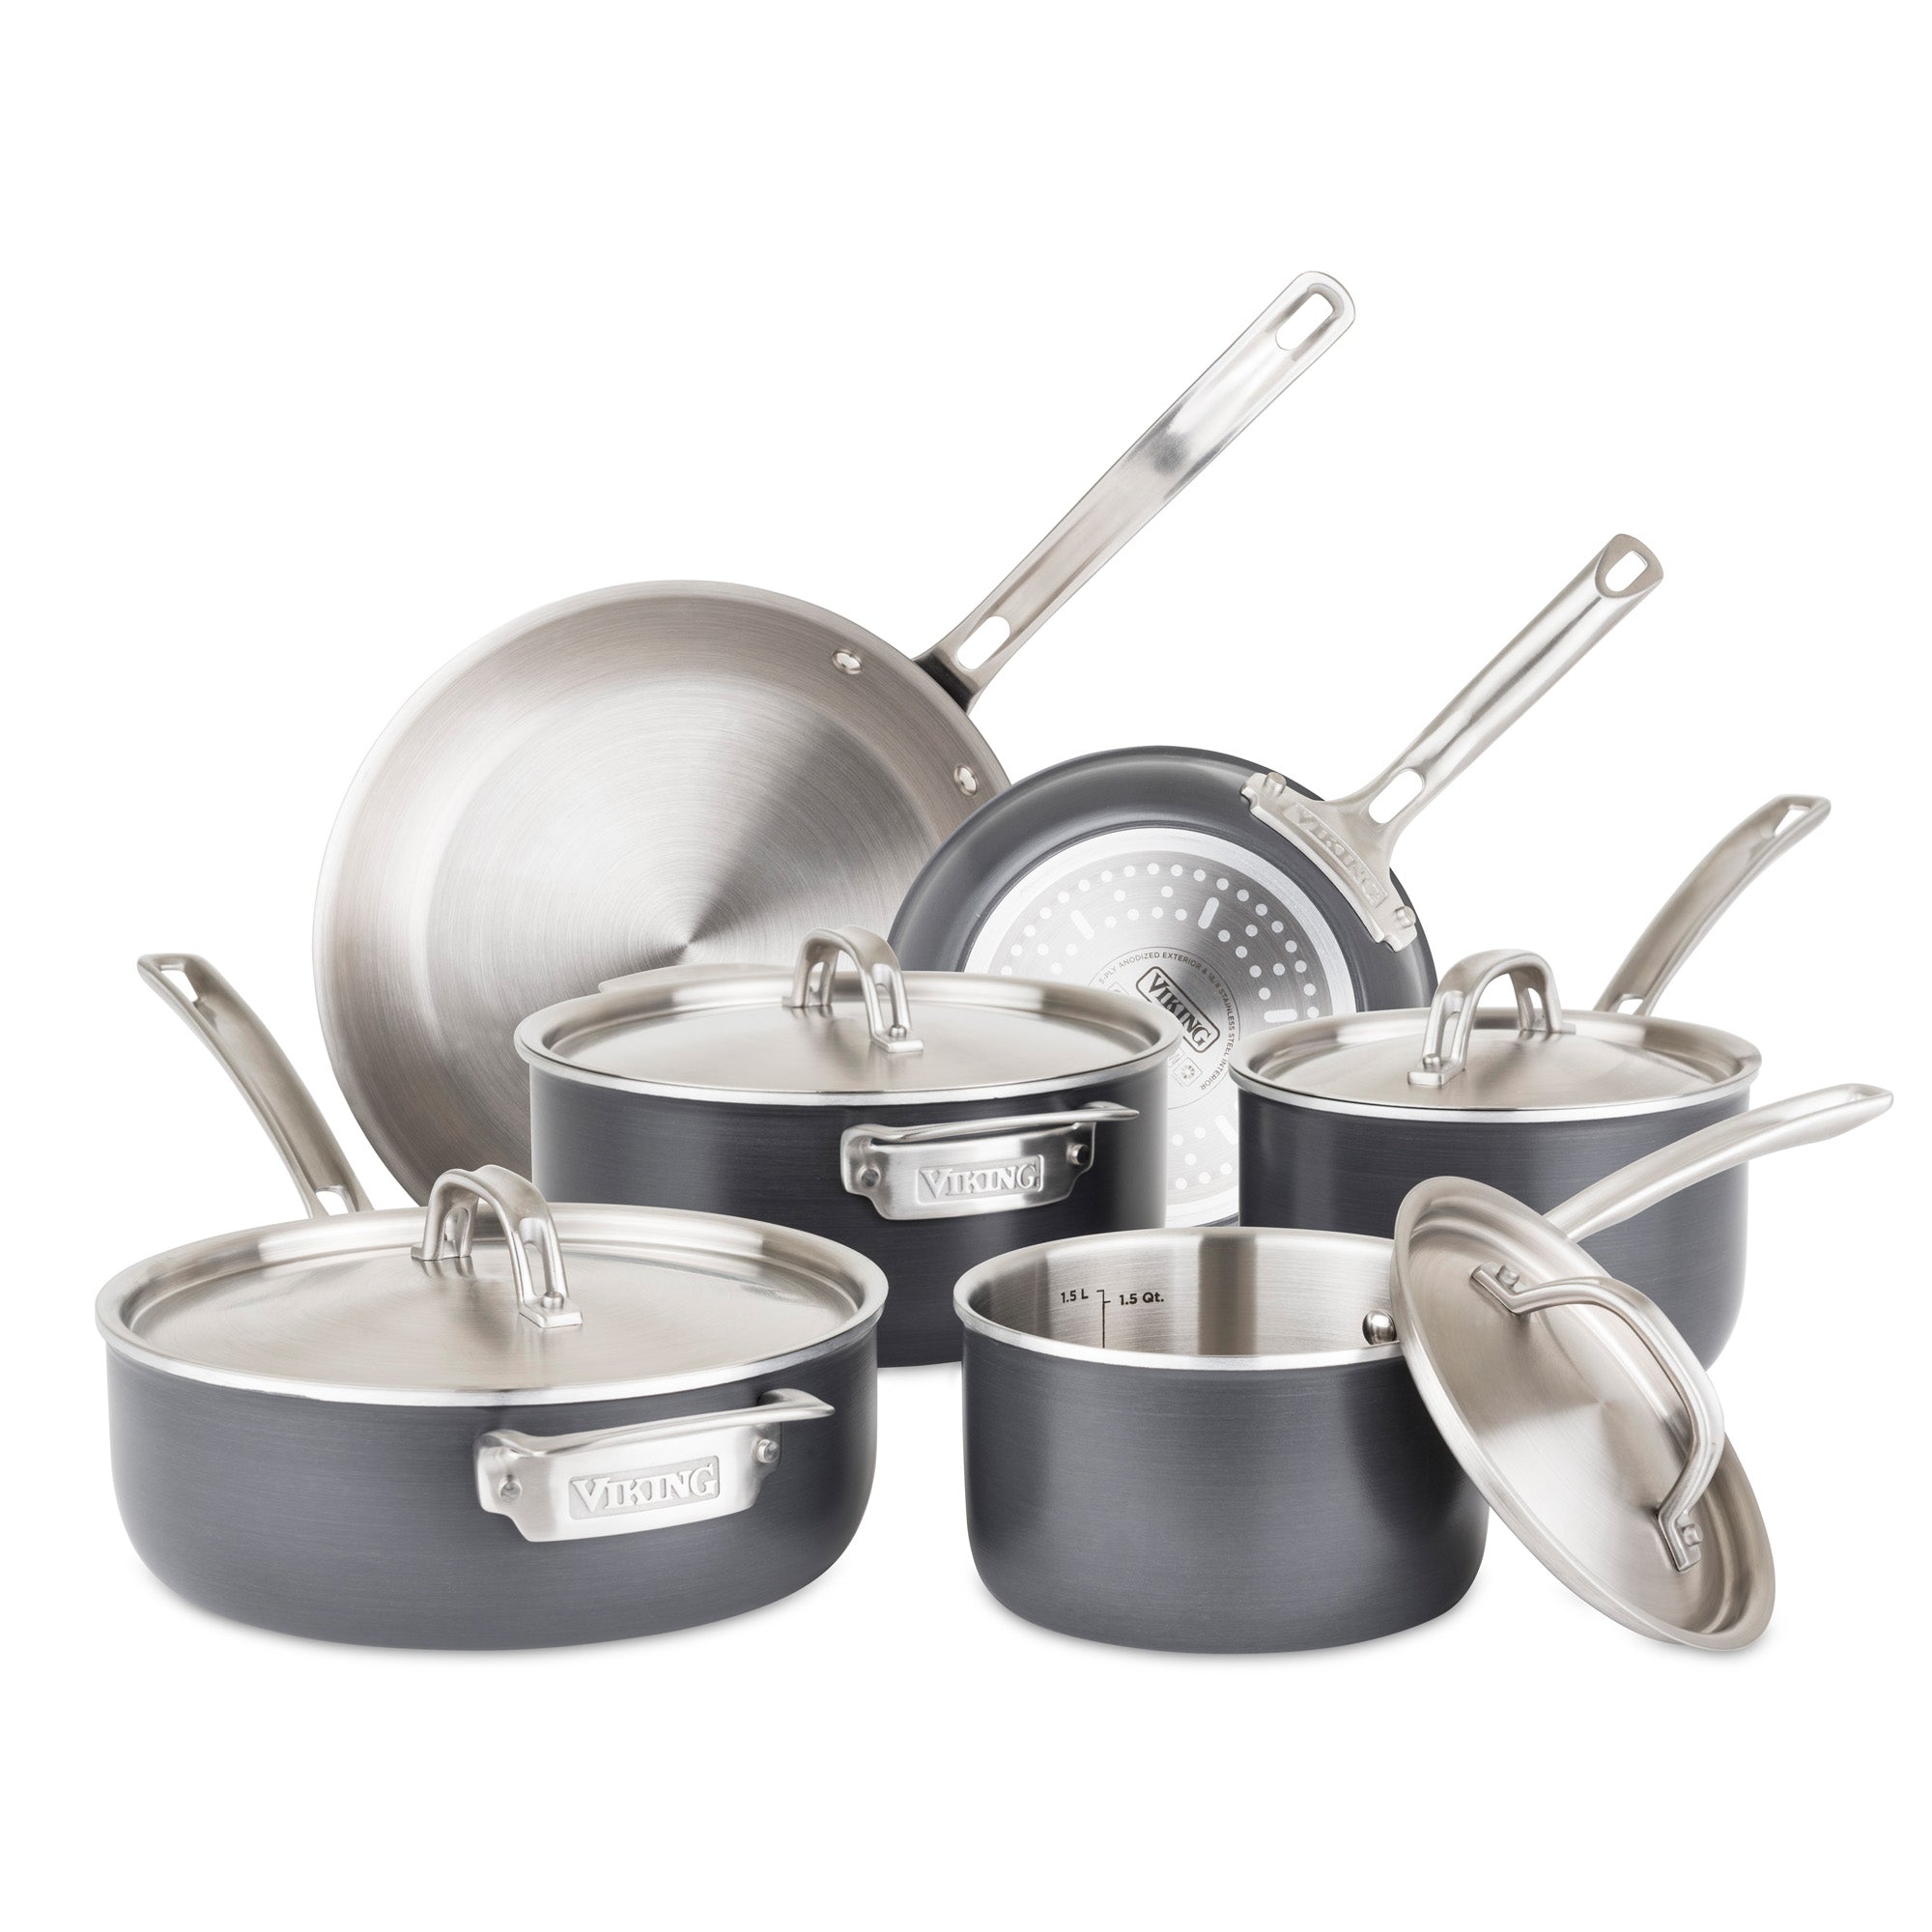 Why You Would Use Hard Anodized Cookware Construction